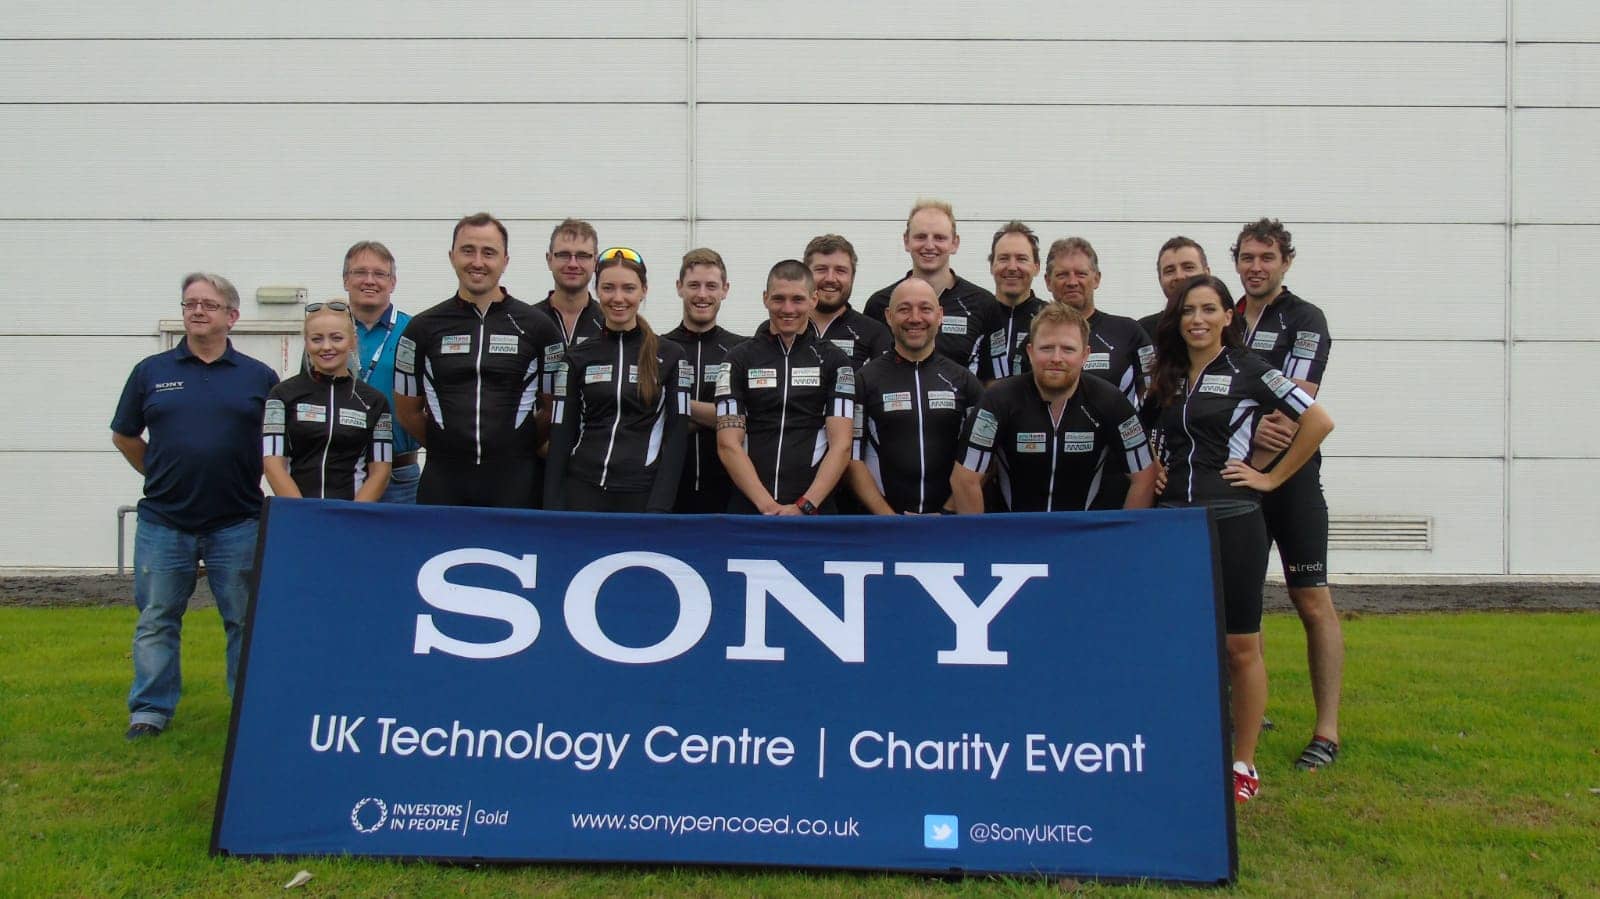 A group of Sony UK TEC employees dressed in biking gear standing behind a blue banner with the text 'Sony UK Technology Centre Charity Event'